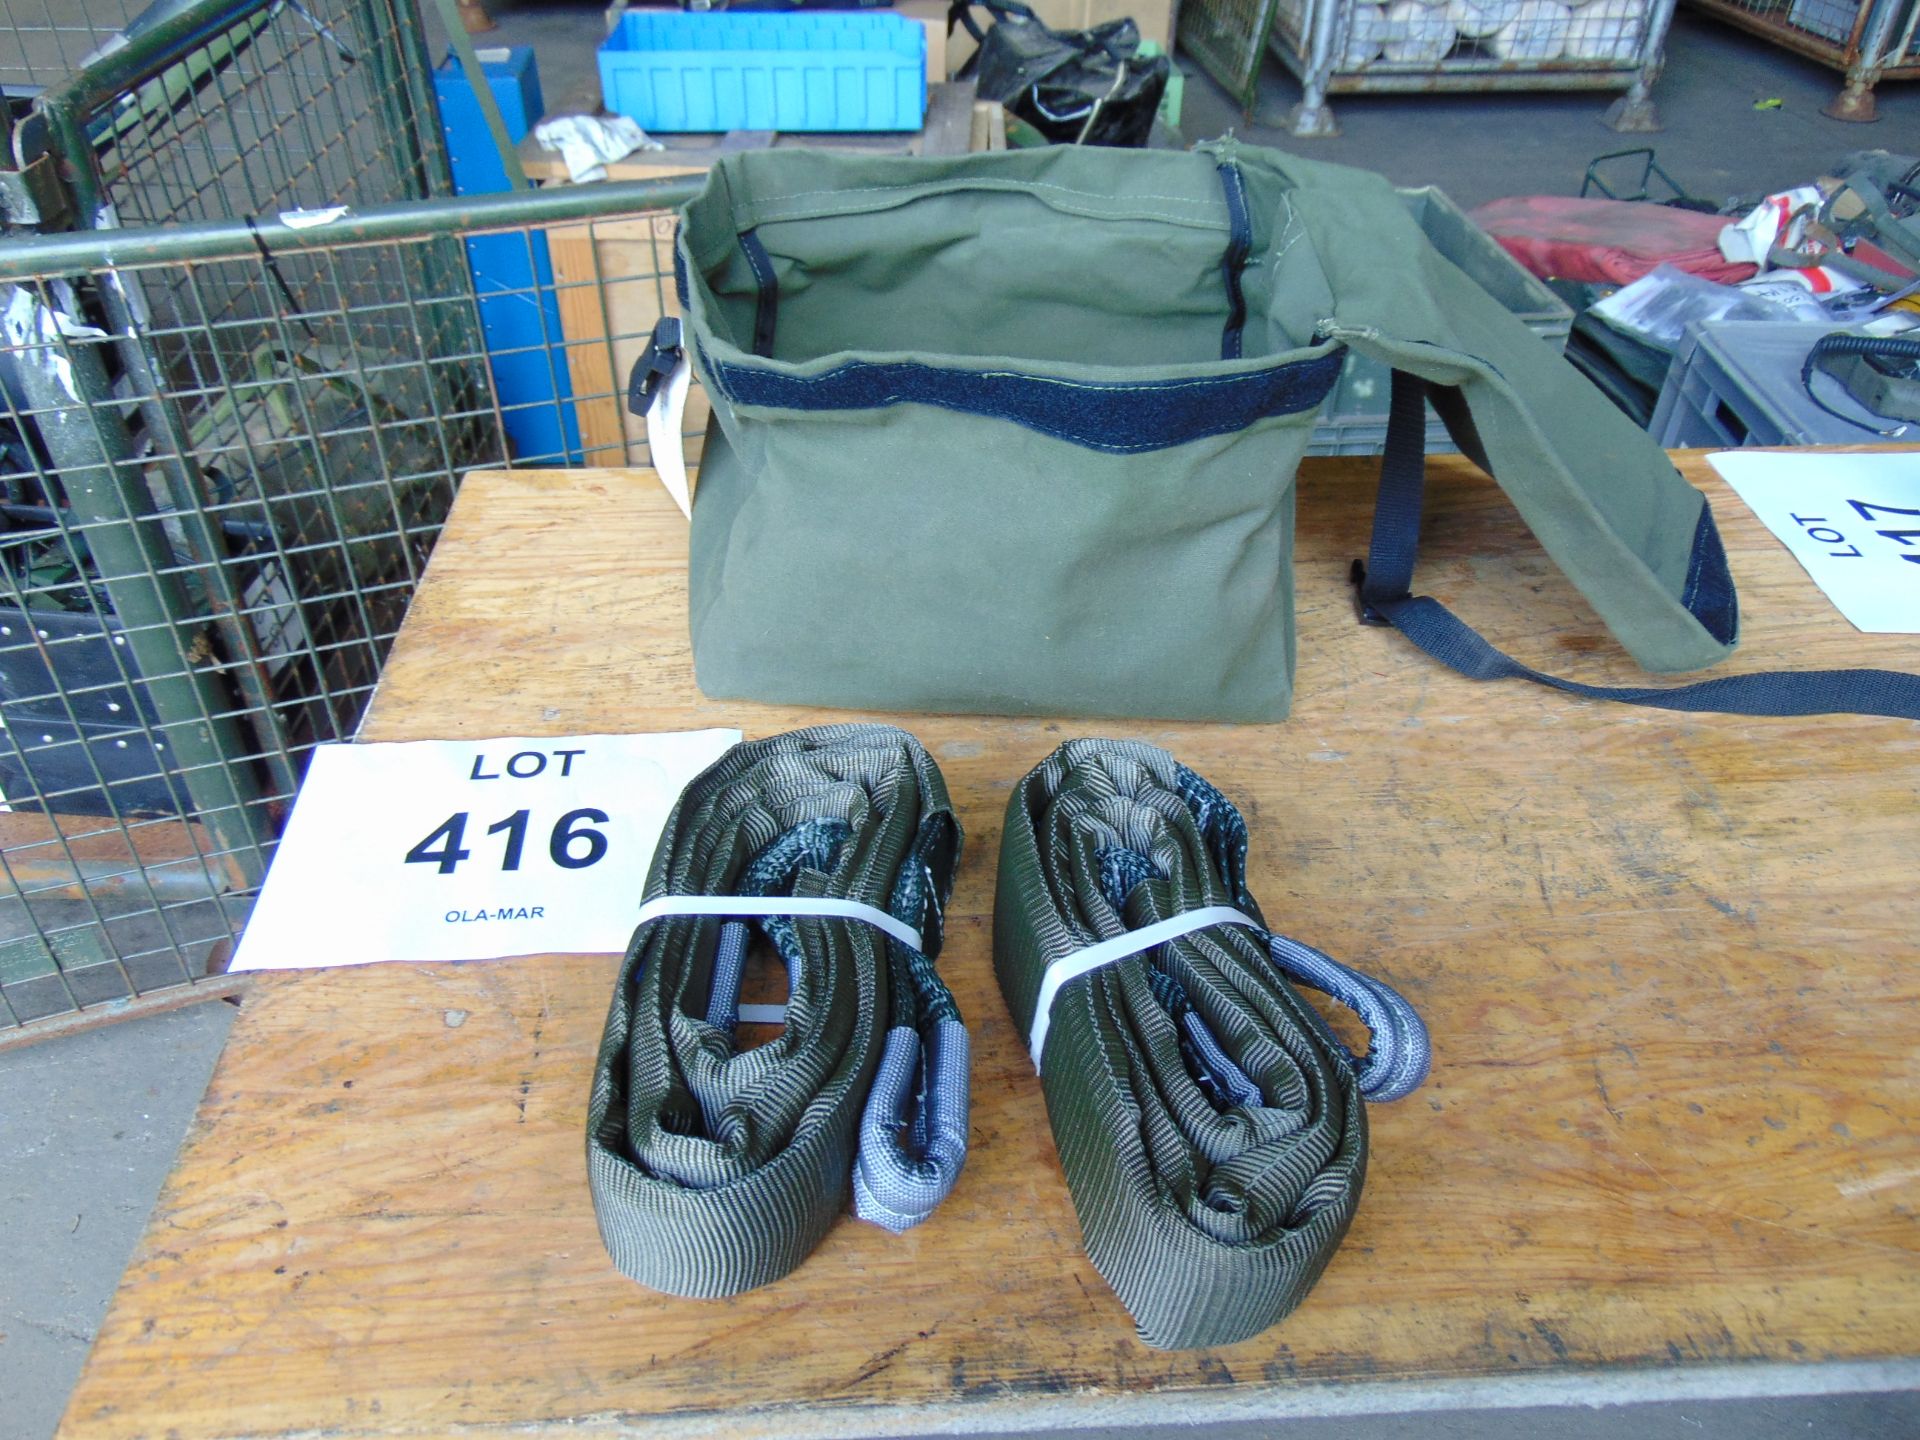 2 x Winching Straps with Bag, New & Unused - Image 3 of 5